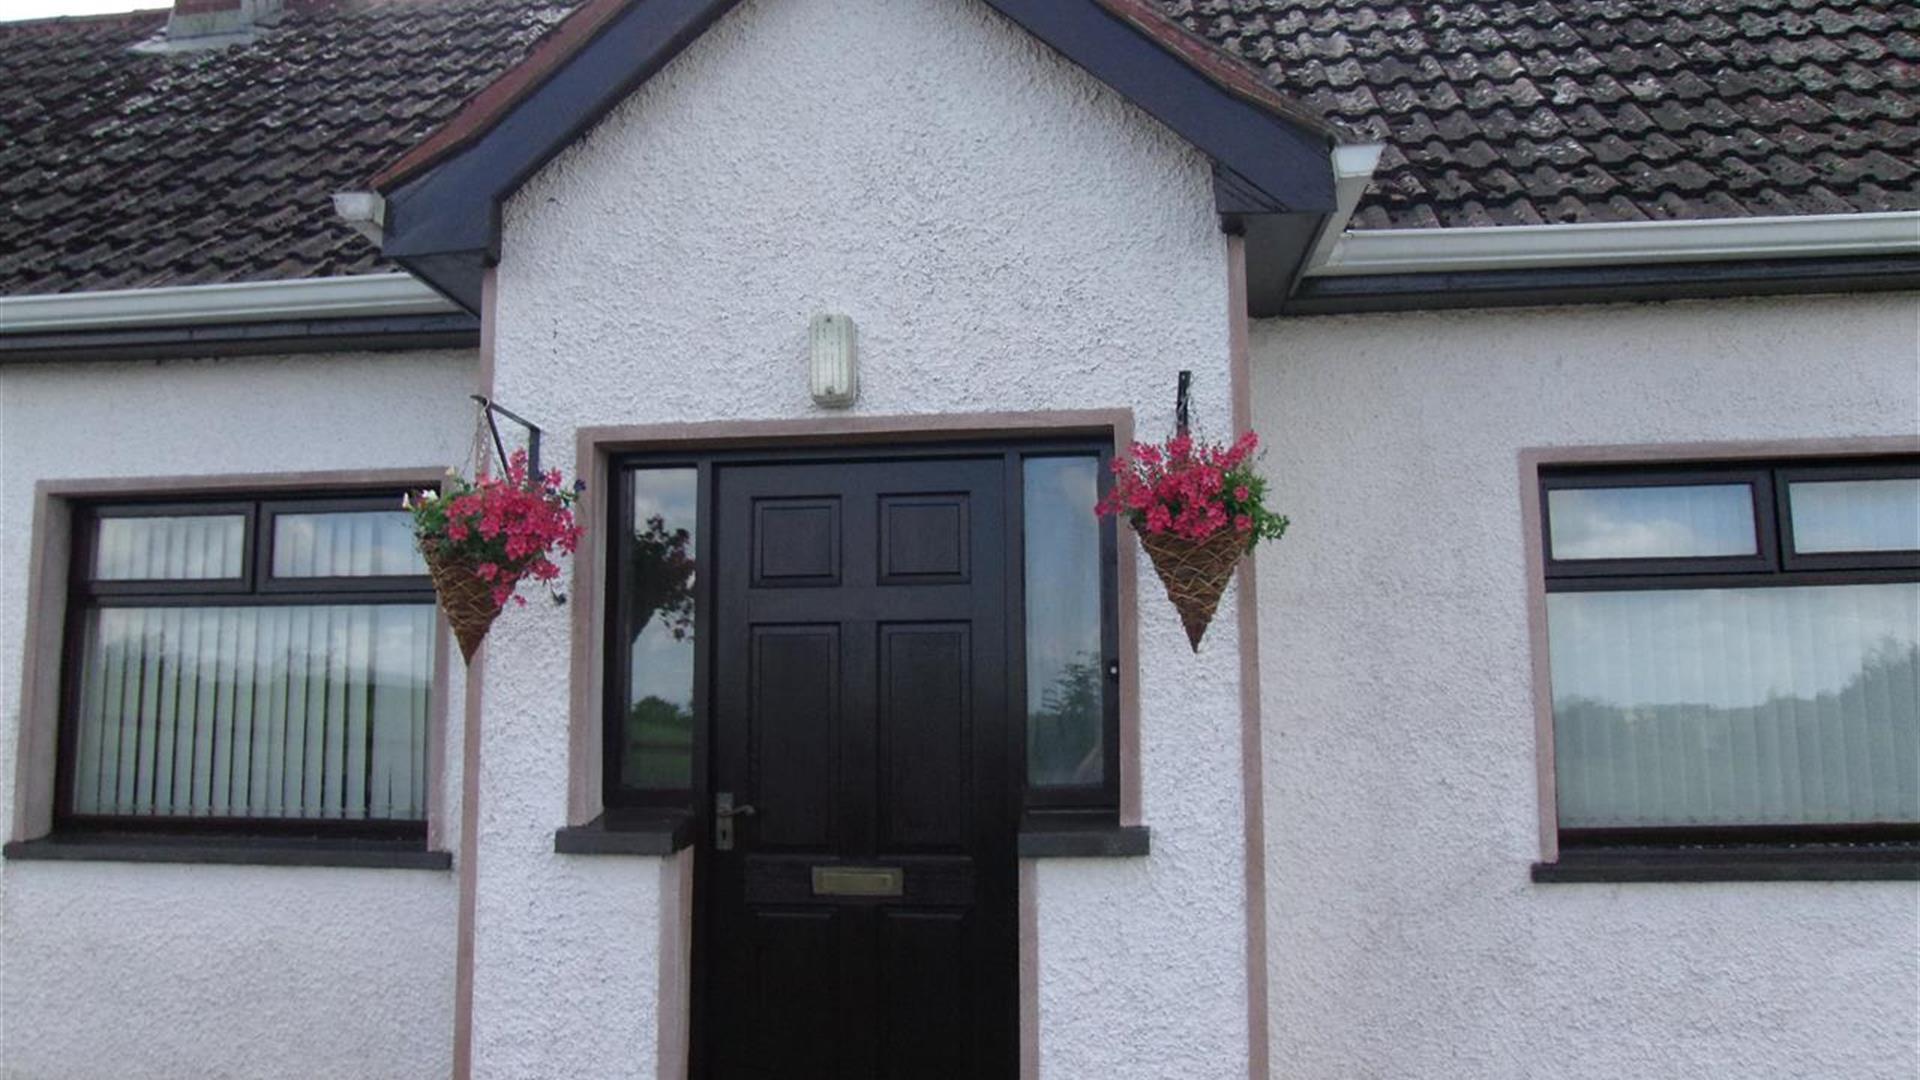 Image of the front of a white bungalow with flower baskets hanging on either side of the door